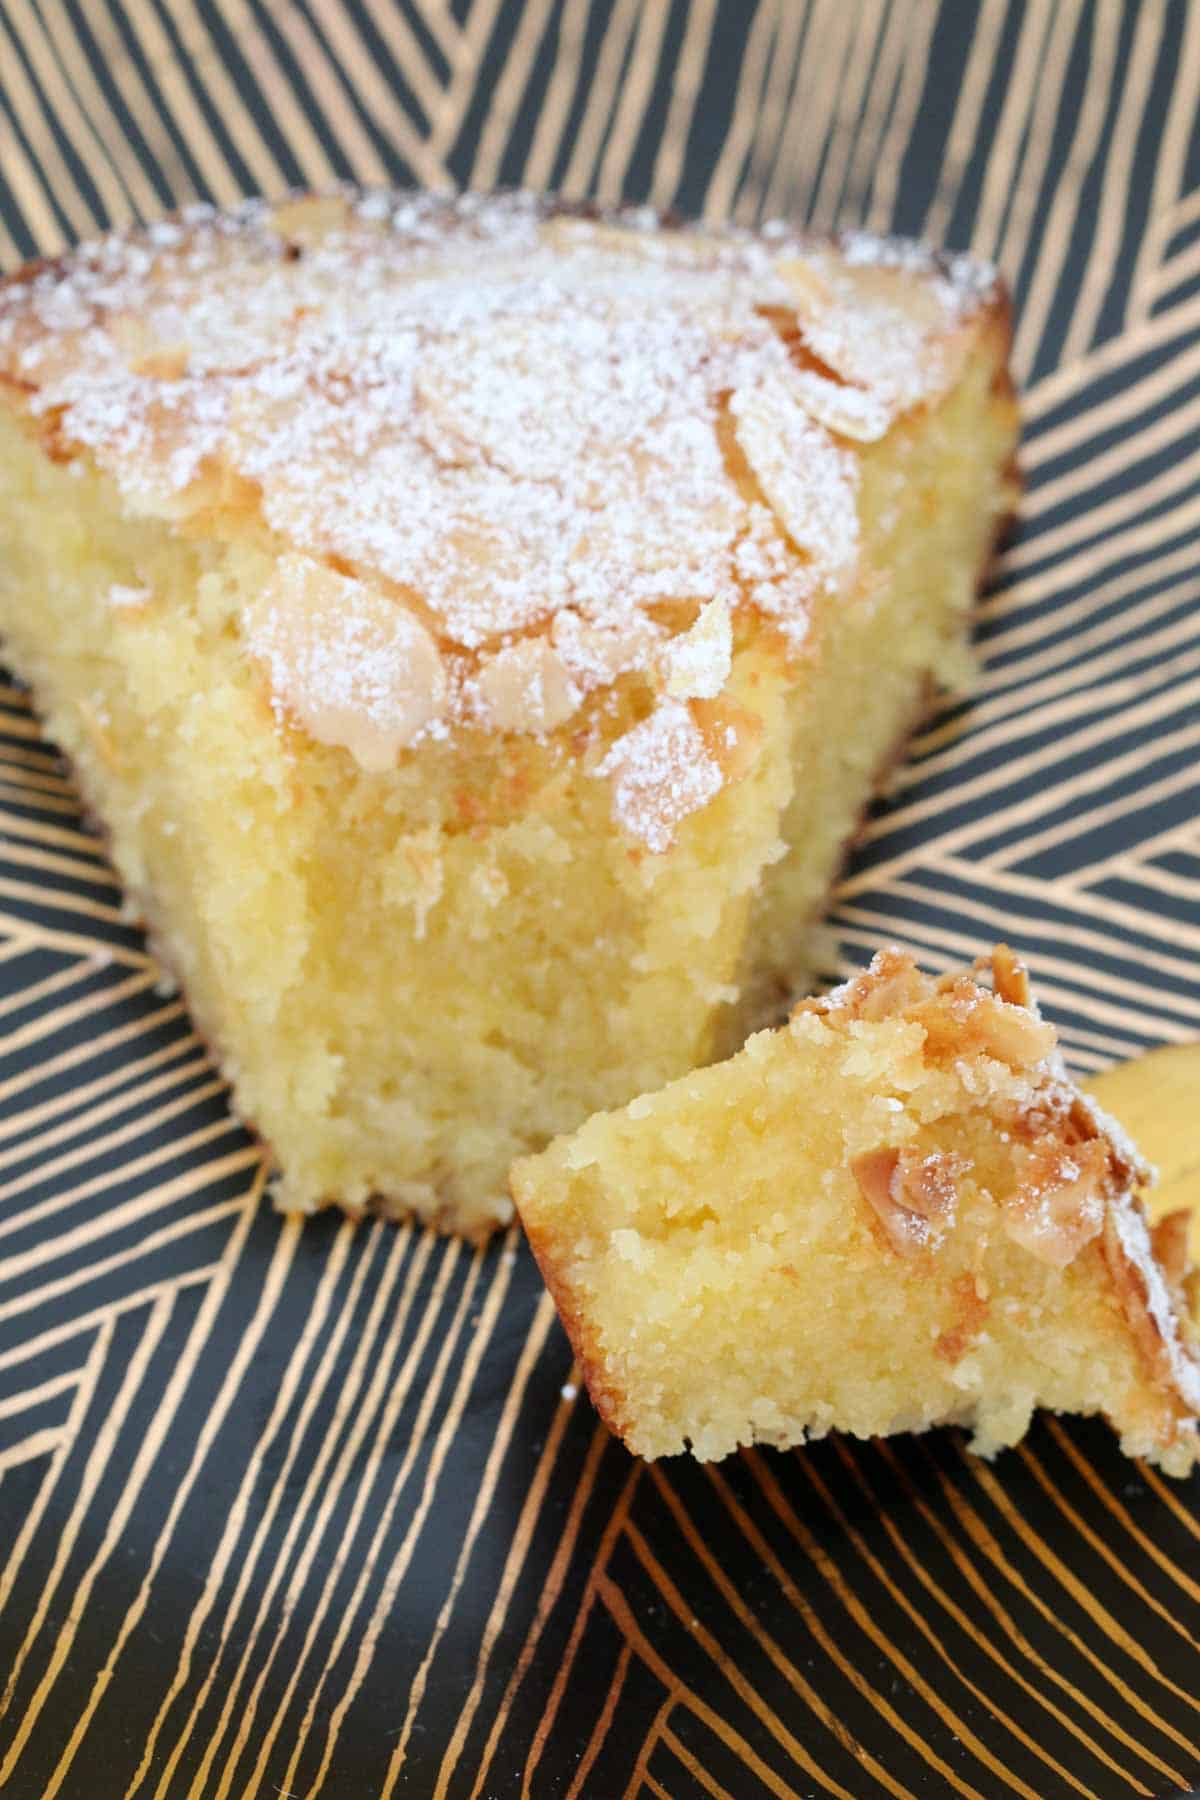 A close up of a serve of moist almond cake dusted with icing sugar, with a forkful on the side.